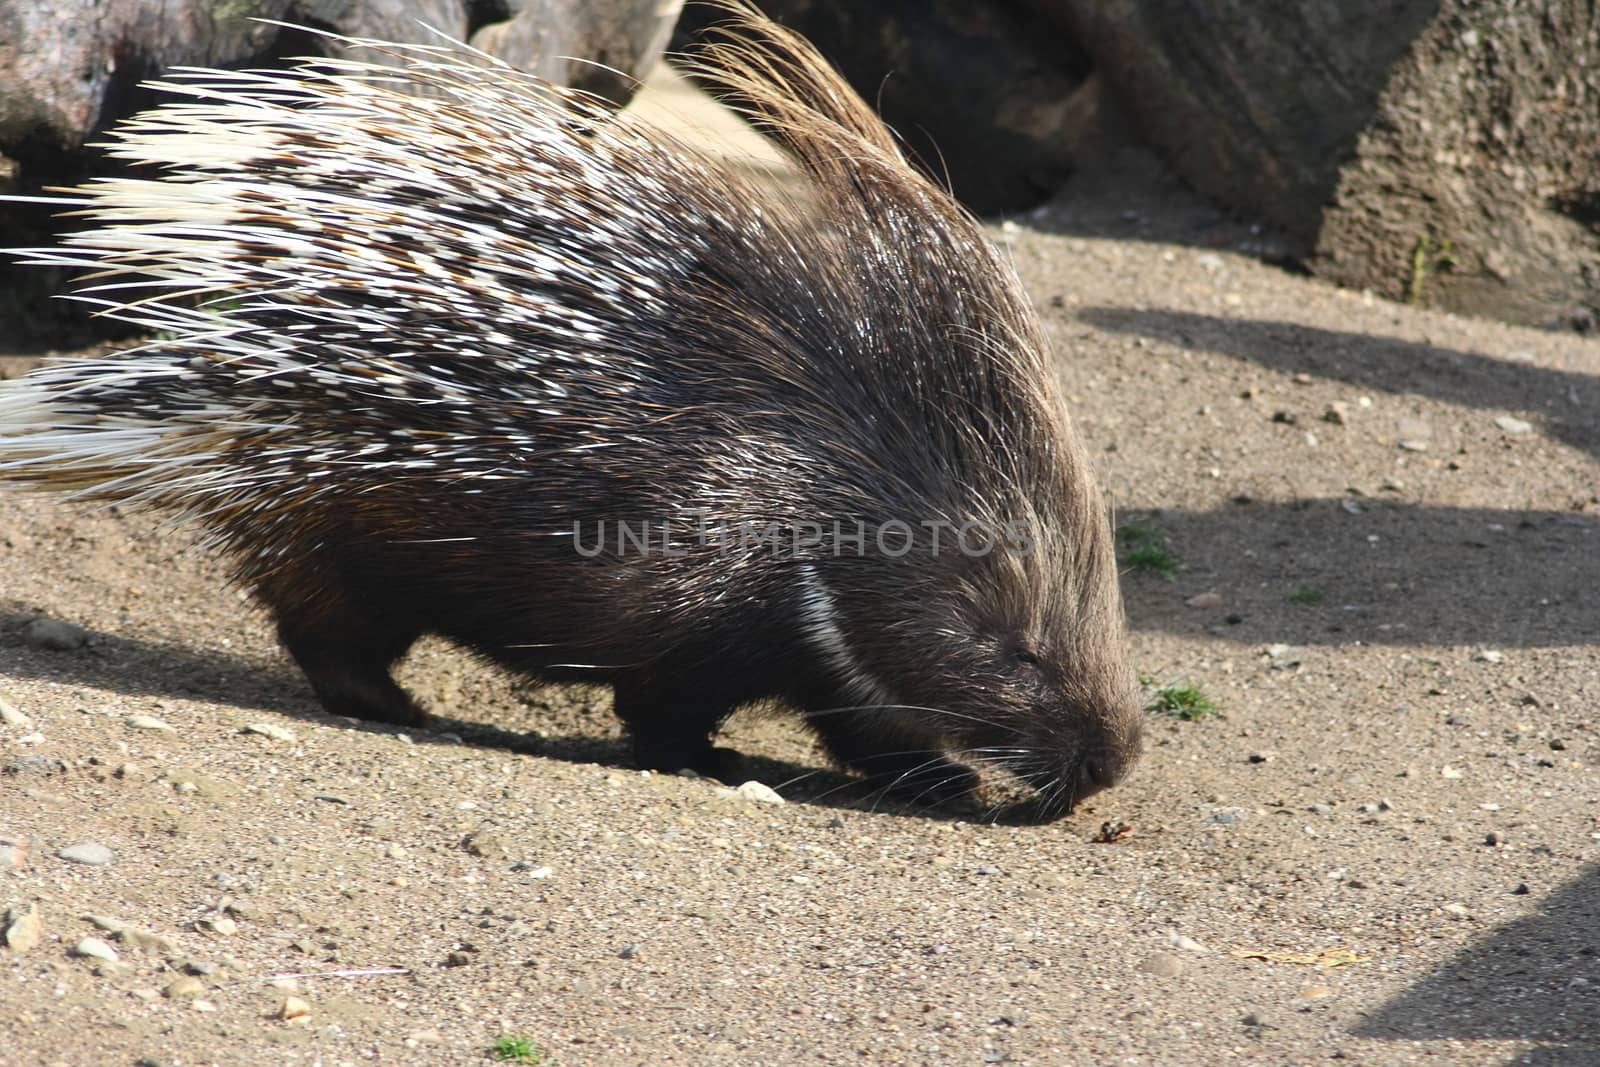 Porcupine (Hystricidae) is a rodent with quills